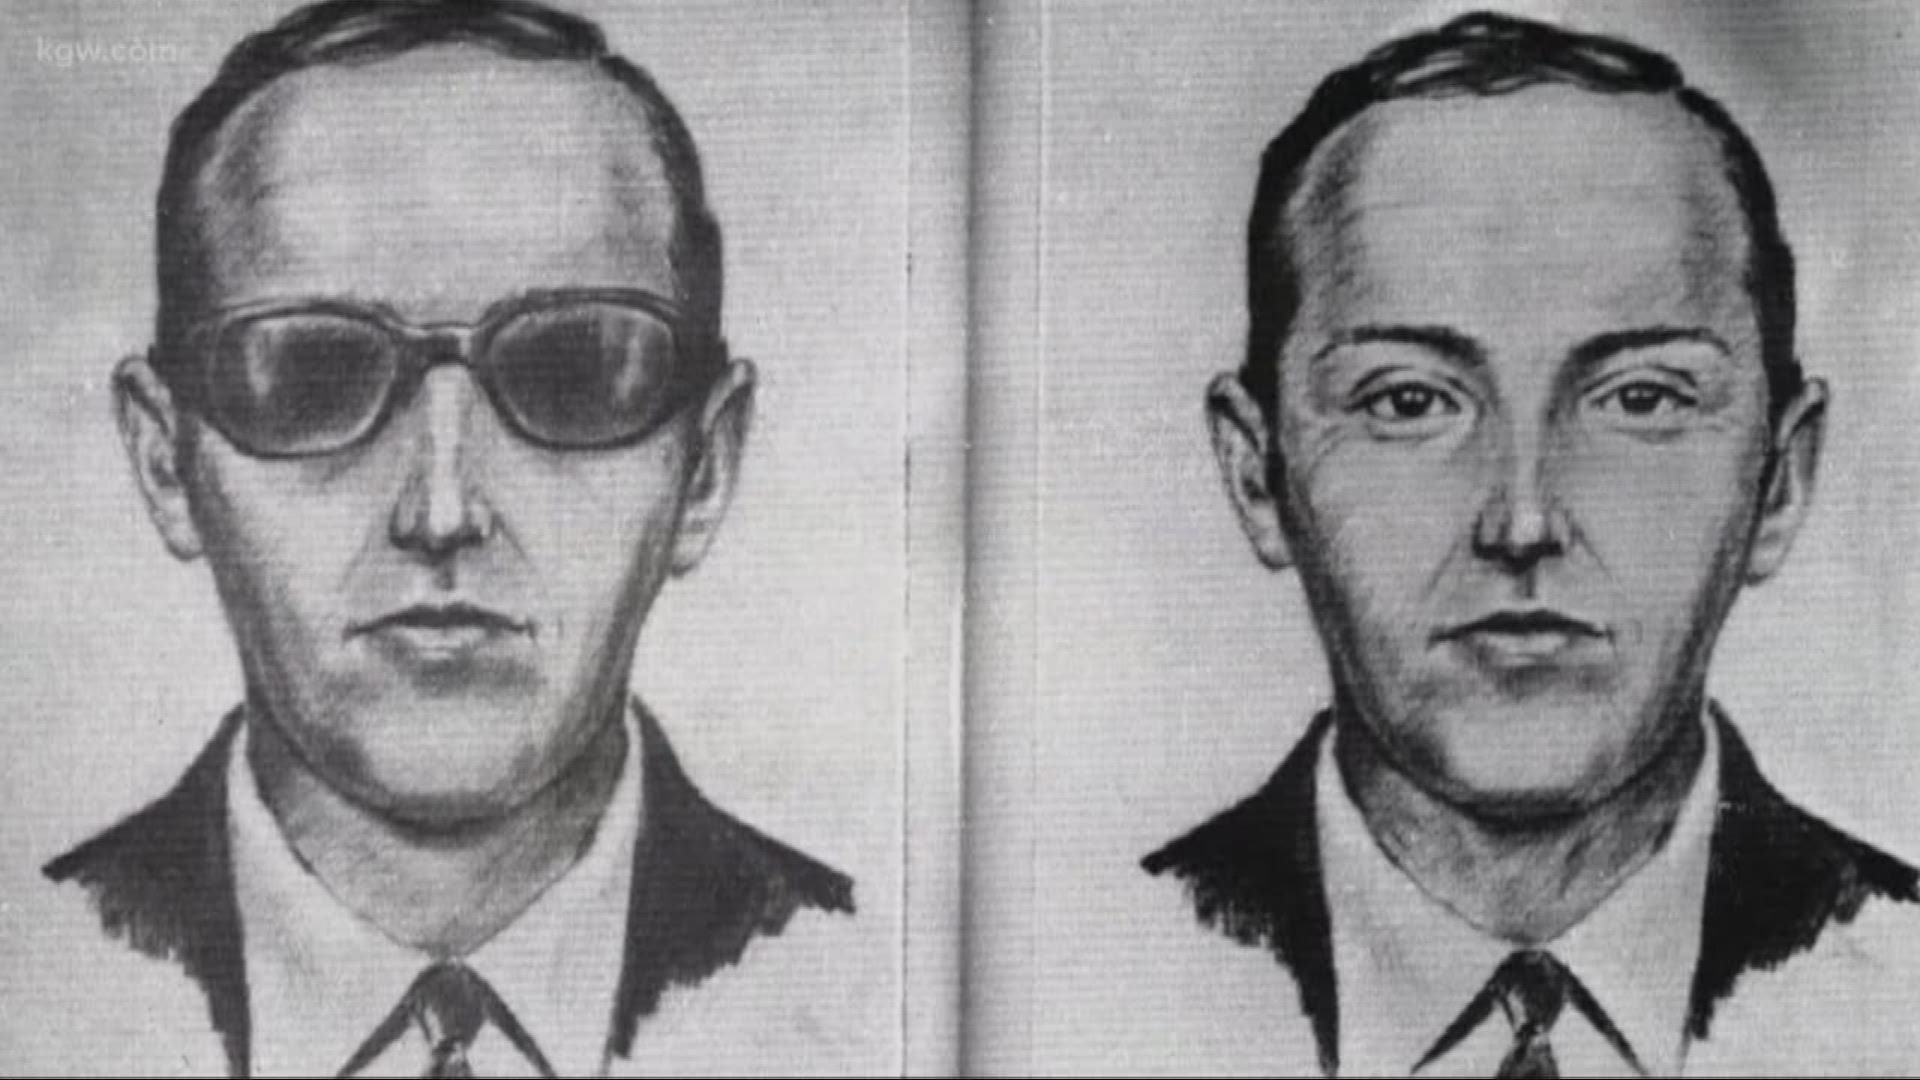 You can take a boat tour inspired by D.B. Cooper.